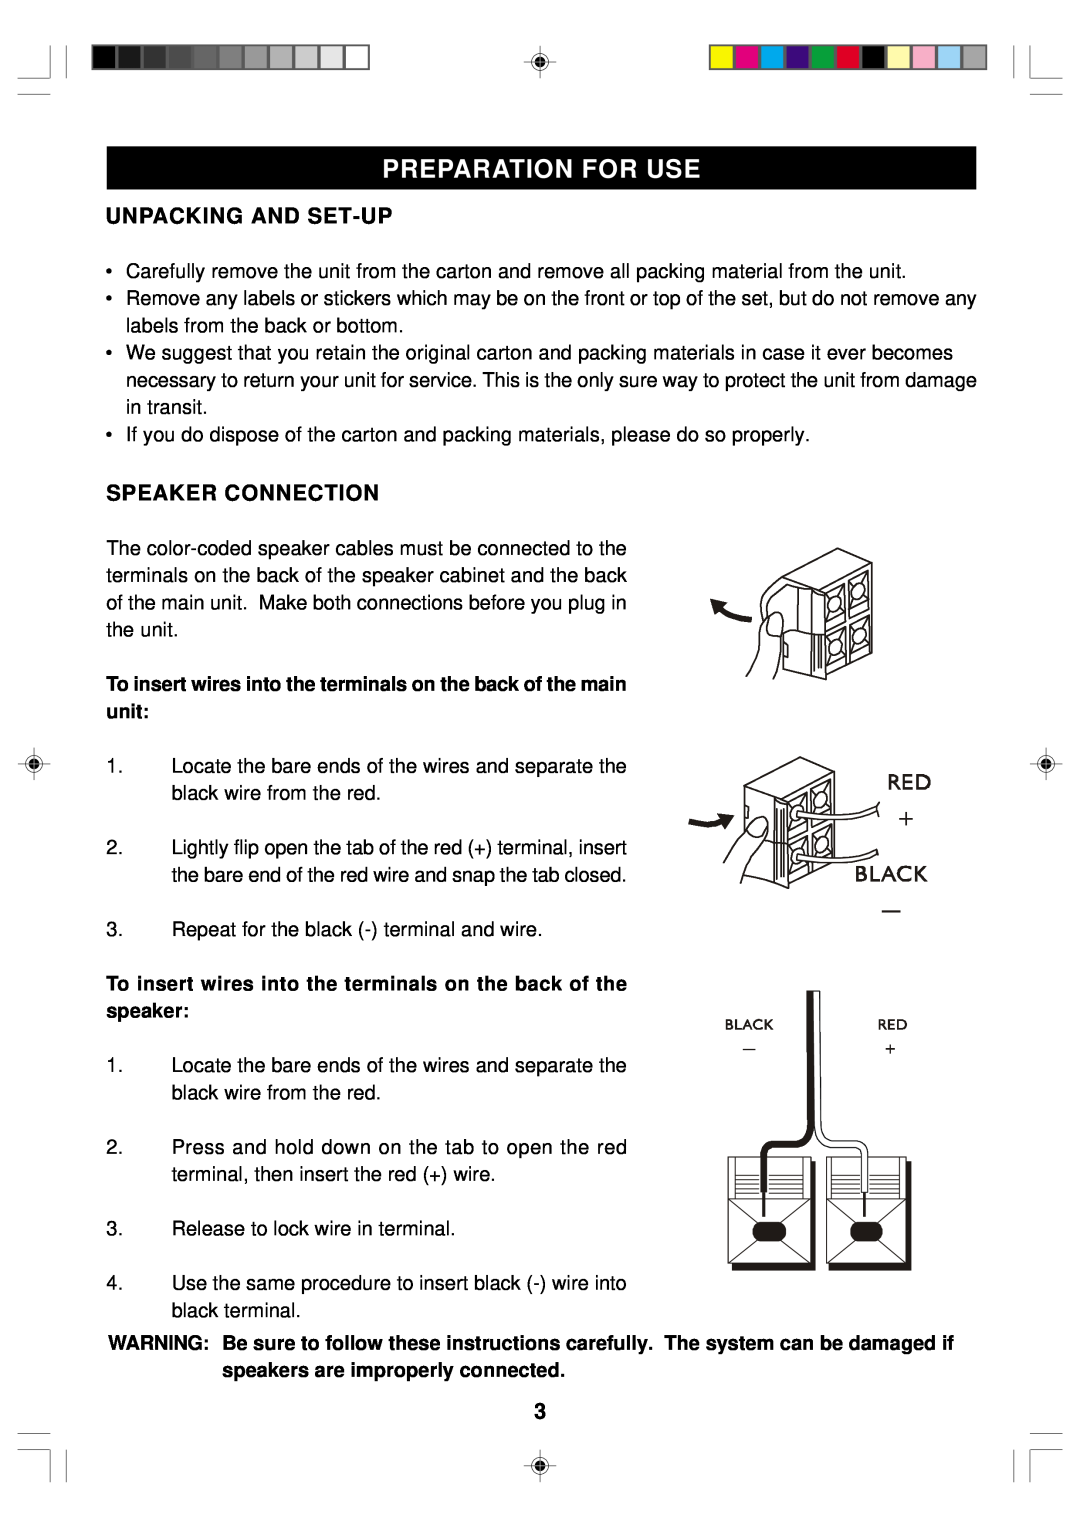 Emerson ES1 owner manual Preparation For Use, Unpacking And Set-Up, Speaker Connection 